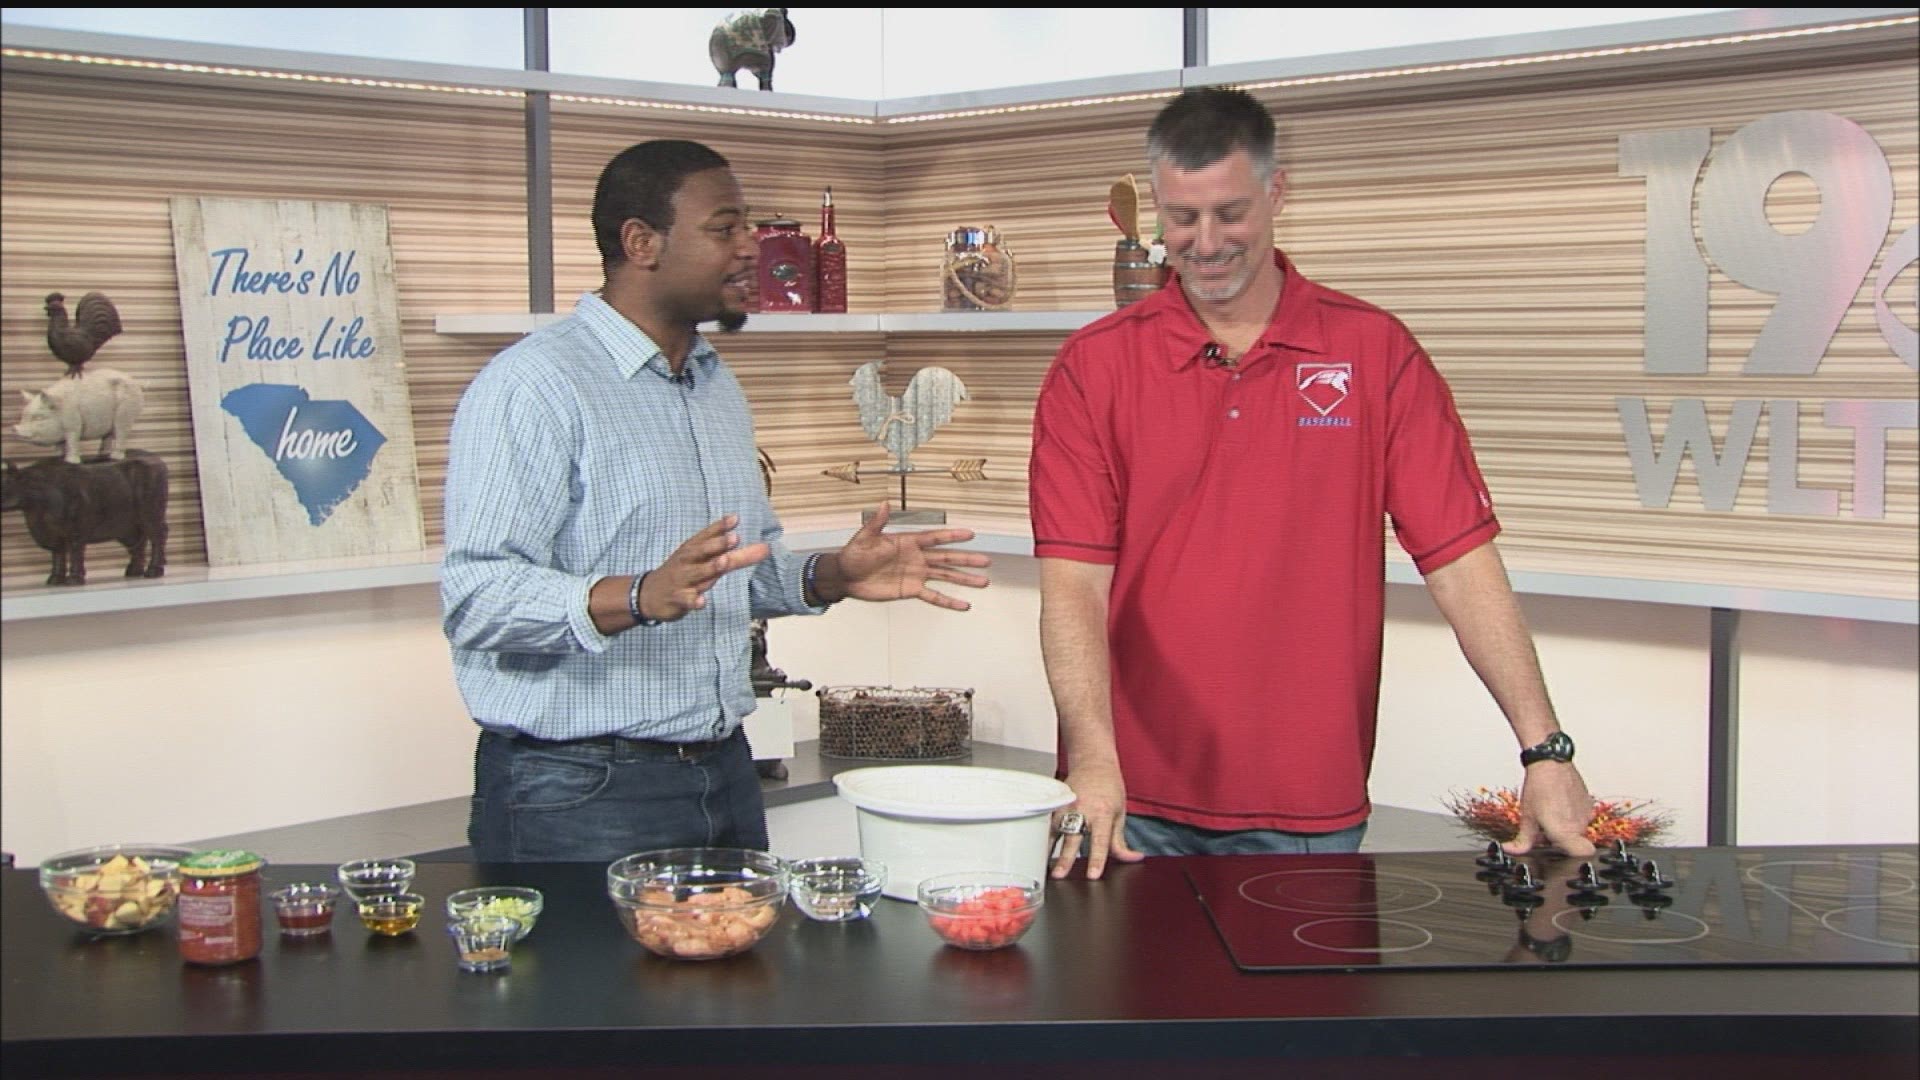 Andy Hallett of the state champion AC Flora baseball team knows a thing or two about putting the right ingredients together to create a winning recipe on the baseball field. Now he helps News 19 Sports Reporter Joe Cook do the same in the kitchen as they make Moroccan Chicken.